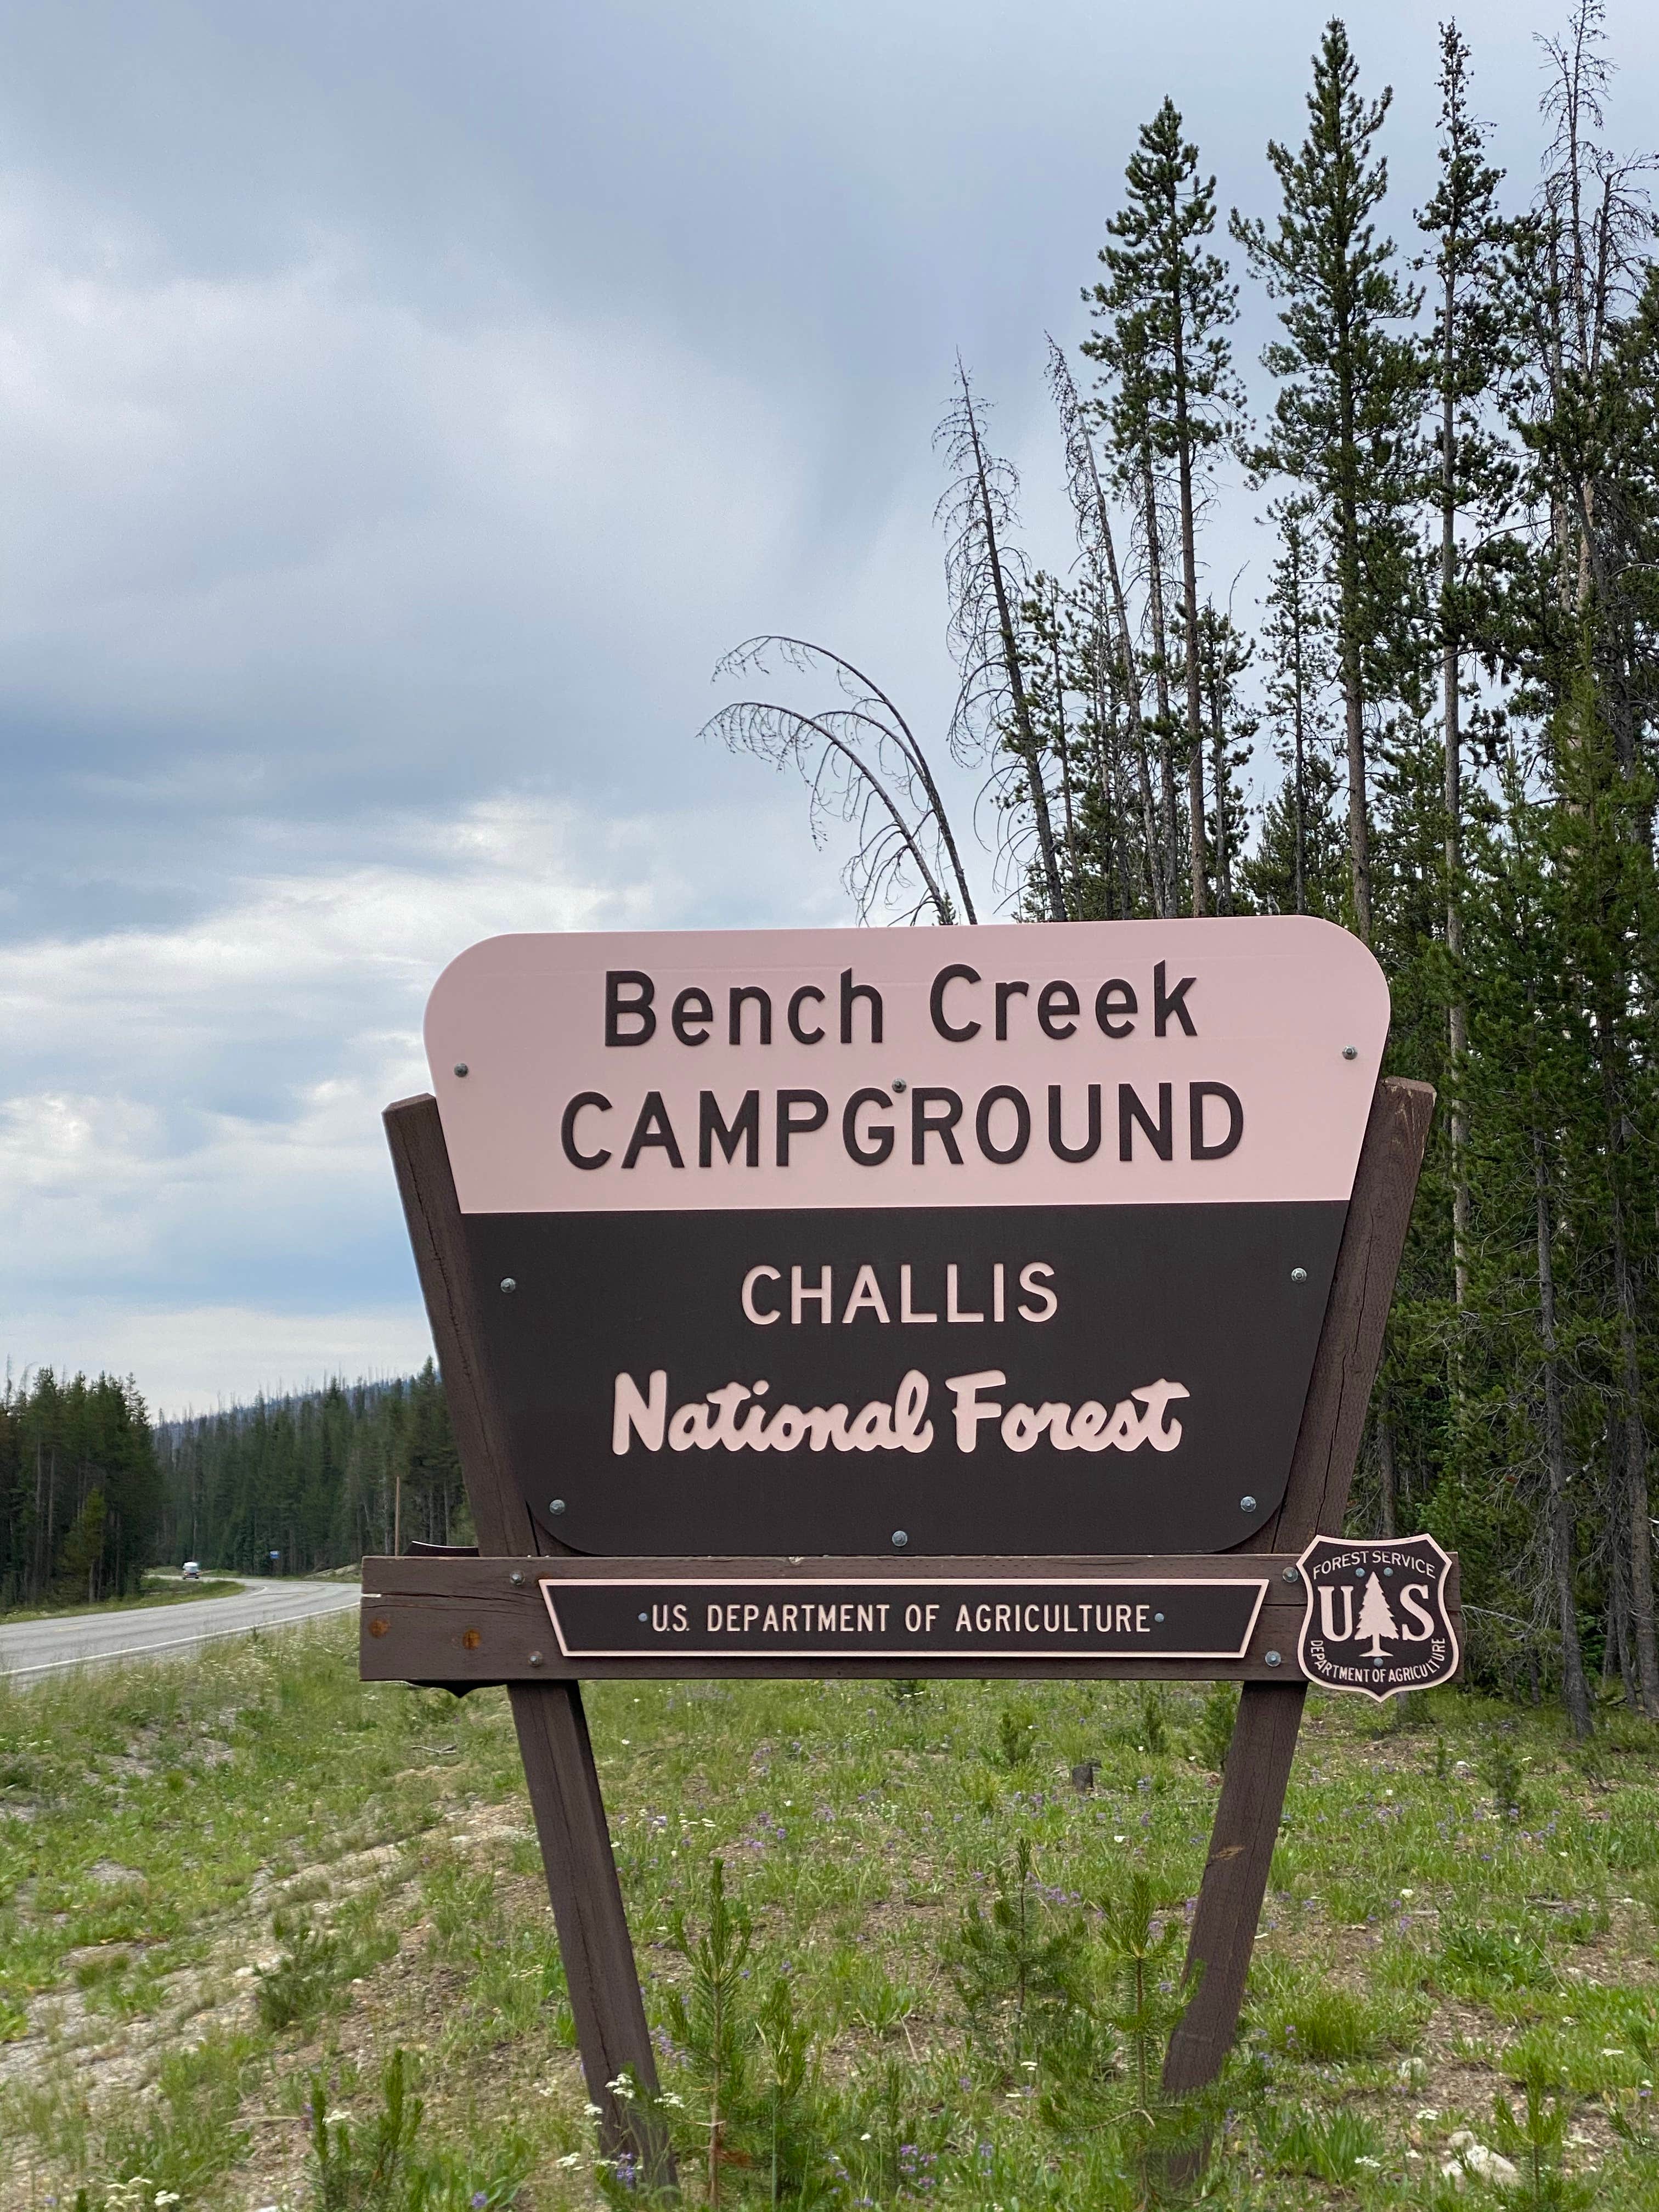 Camper submitted image from Bench Creek Campground - 3